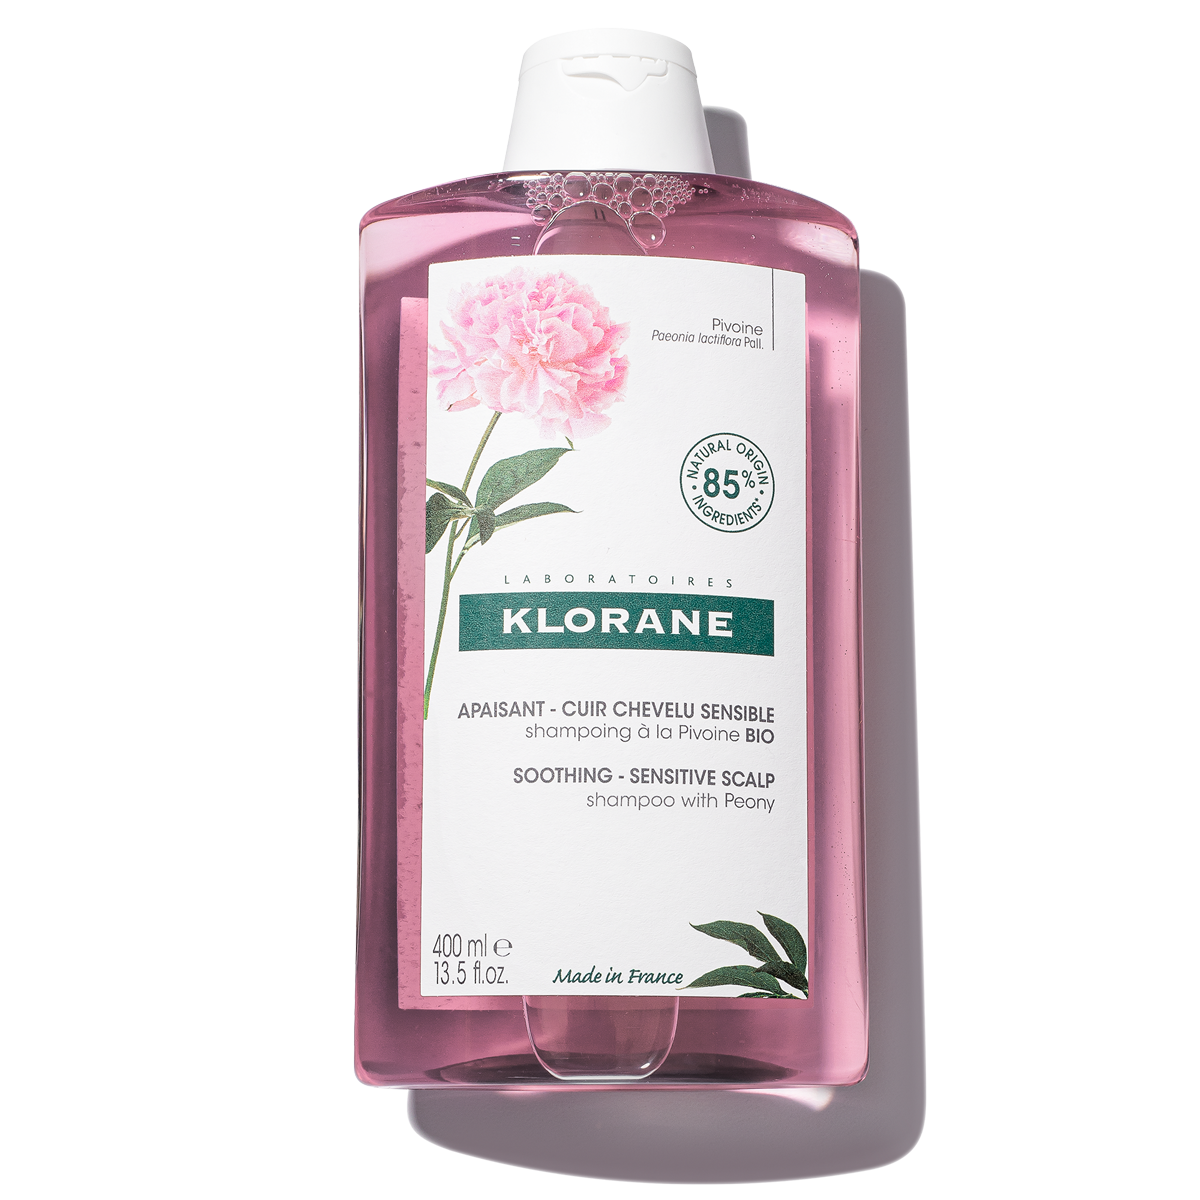 Klorane Shampoo with Peony, Soothing Relief for Dry Itchy Flaky Sensitive Scalp, pH Balanced, Provides Scalp Comfort 13.5 Fl Oz (Pack of 1) Shampoo